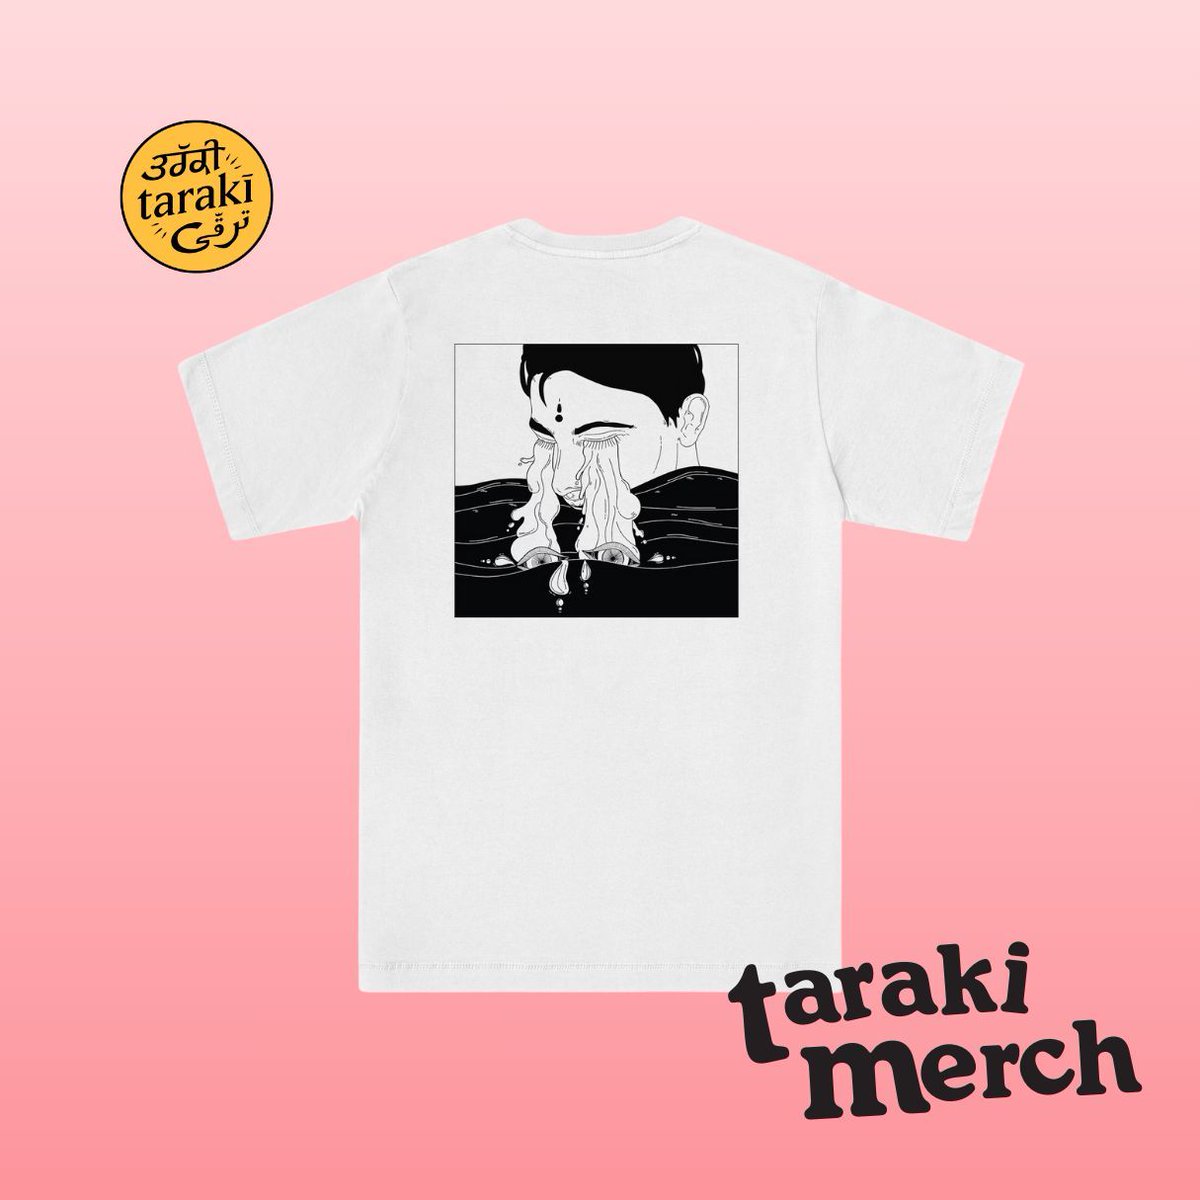 🌸 taraki merch 🌸 all proceeds go towards supporting our work reshaping approaches to mental health with punjabi communities. follow the link below to order yours today! 💫 everpress.com/profile/taraki